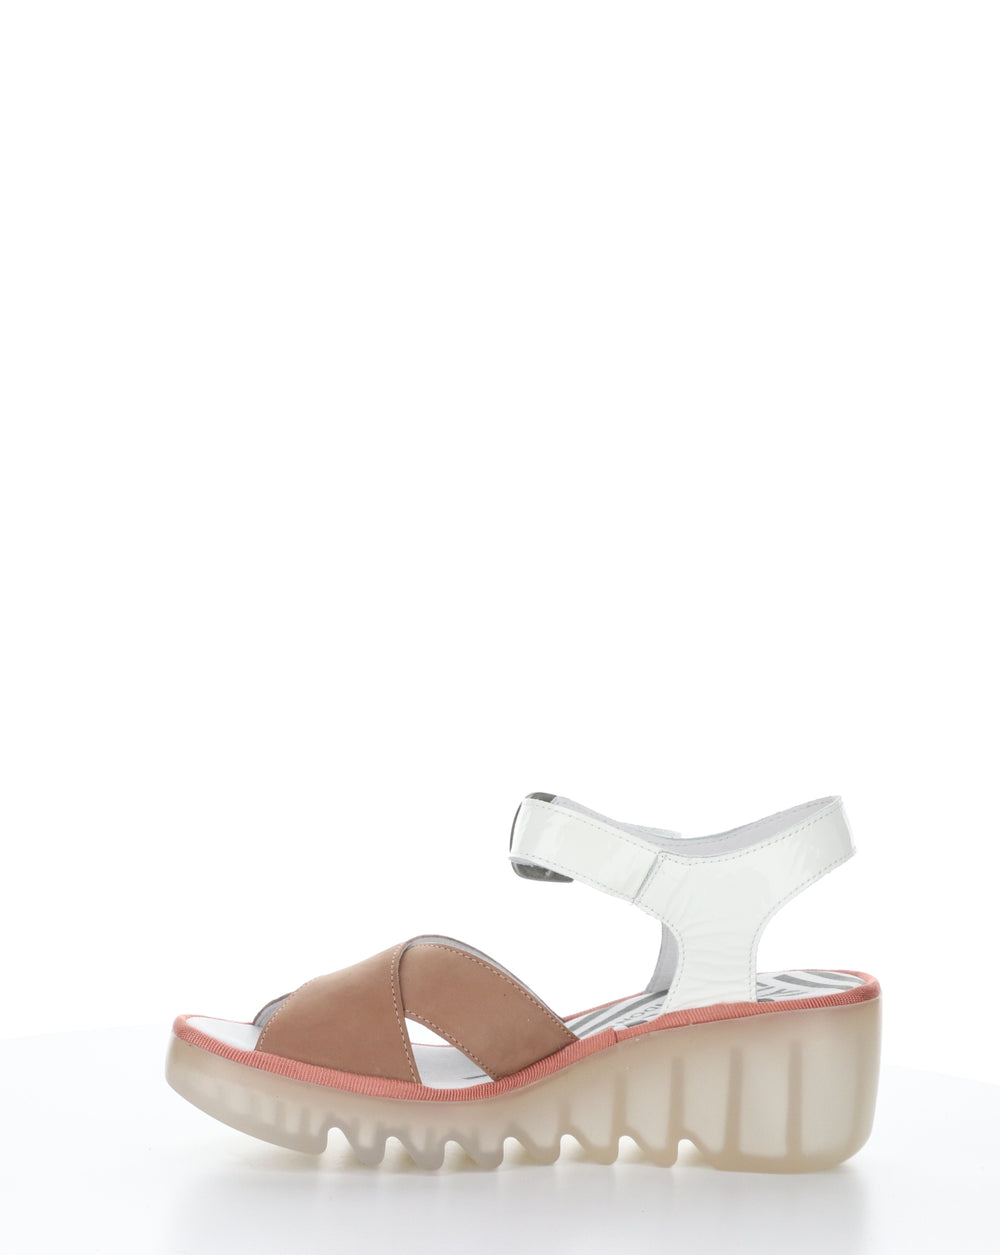 BACE411FLY 001 PINK/OFF WHITE Round toe Sandals